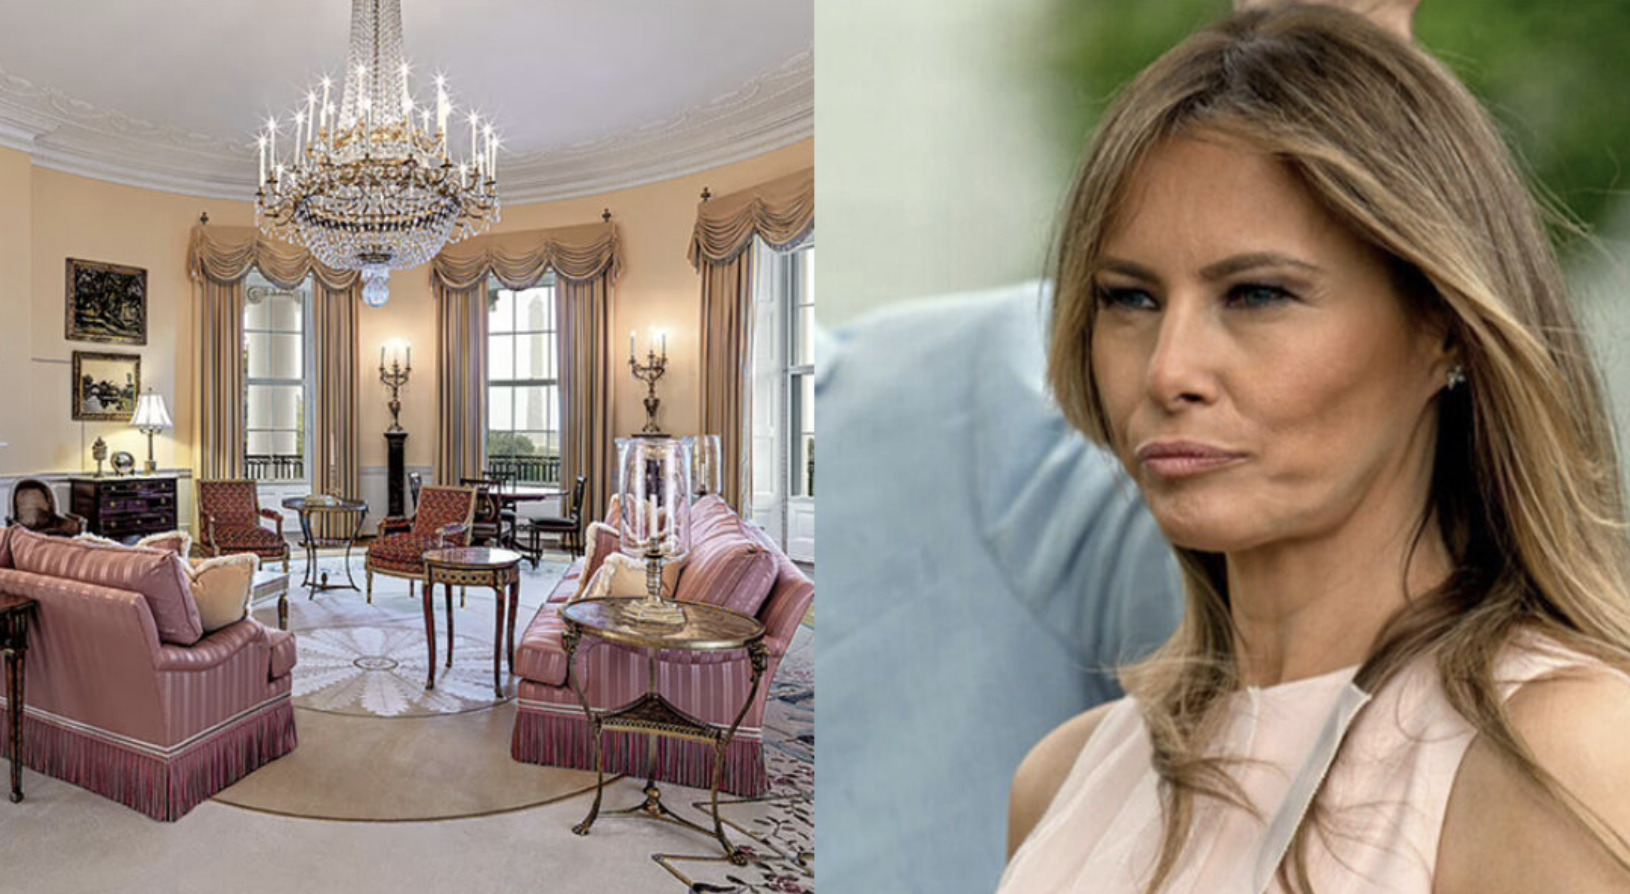 Melania Goes to War With the White House After They Changed Her ‘Renovations’ in the Private Living Quarters and She’s FURIOUS